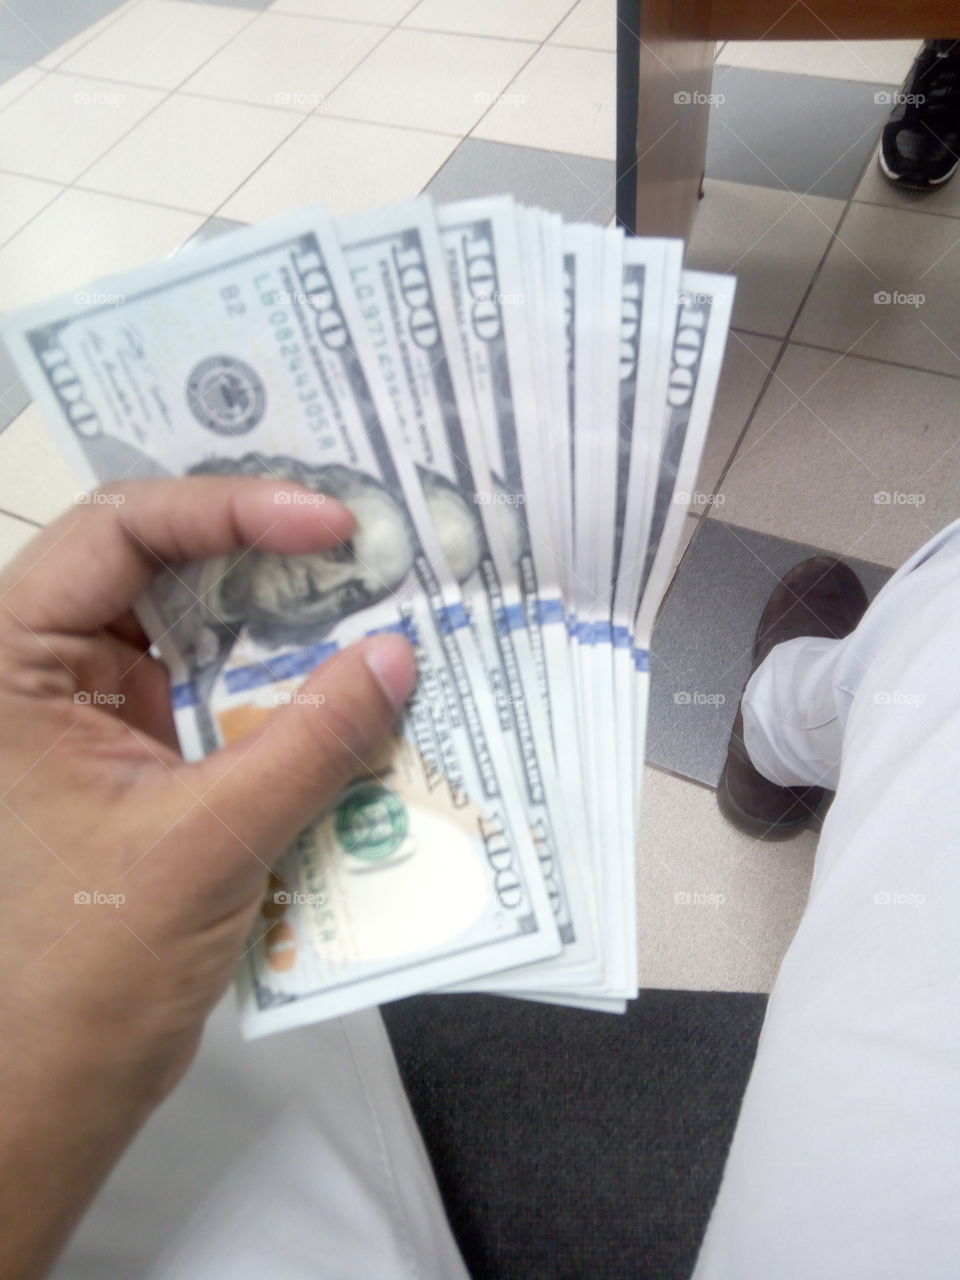 Dollers $ (Temporary Happyness)